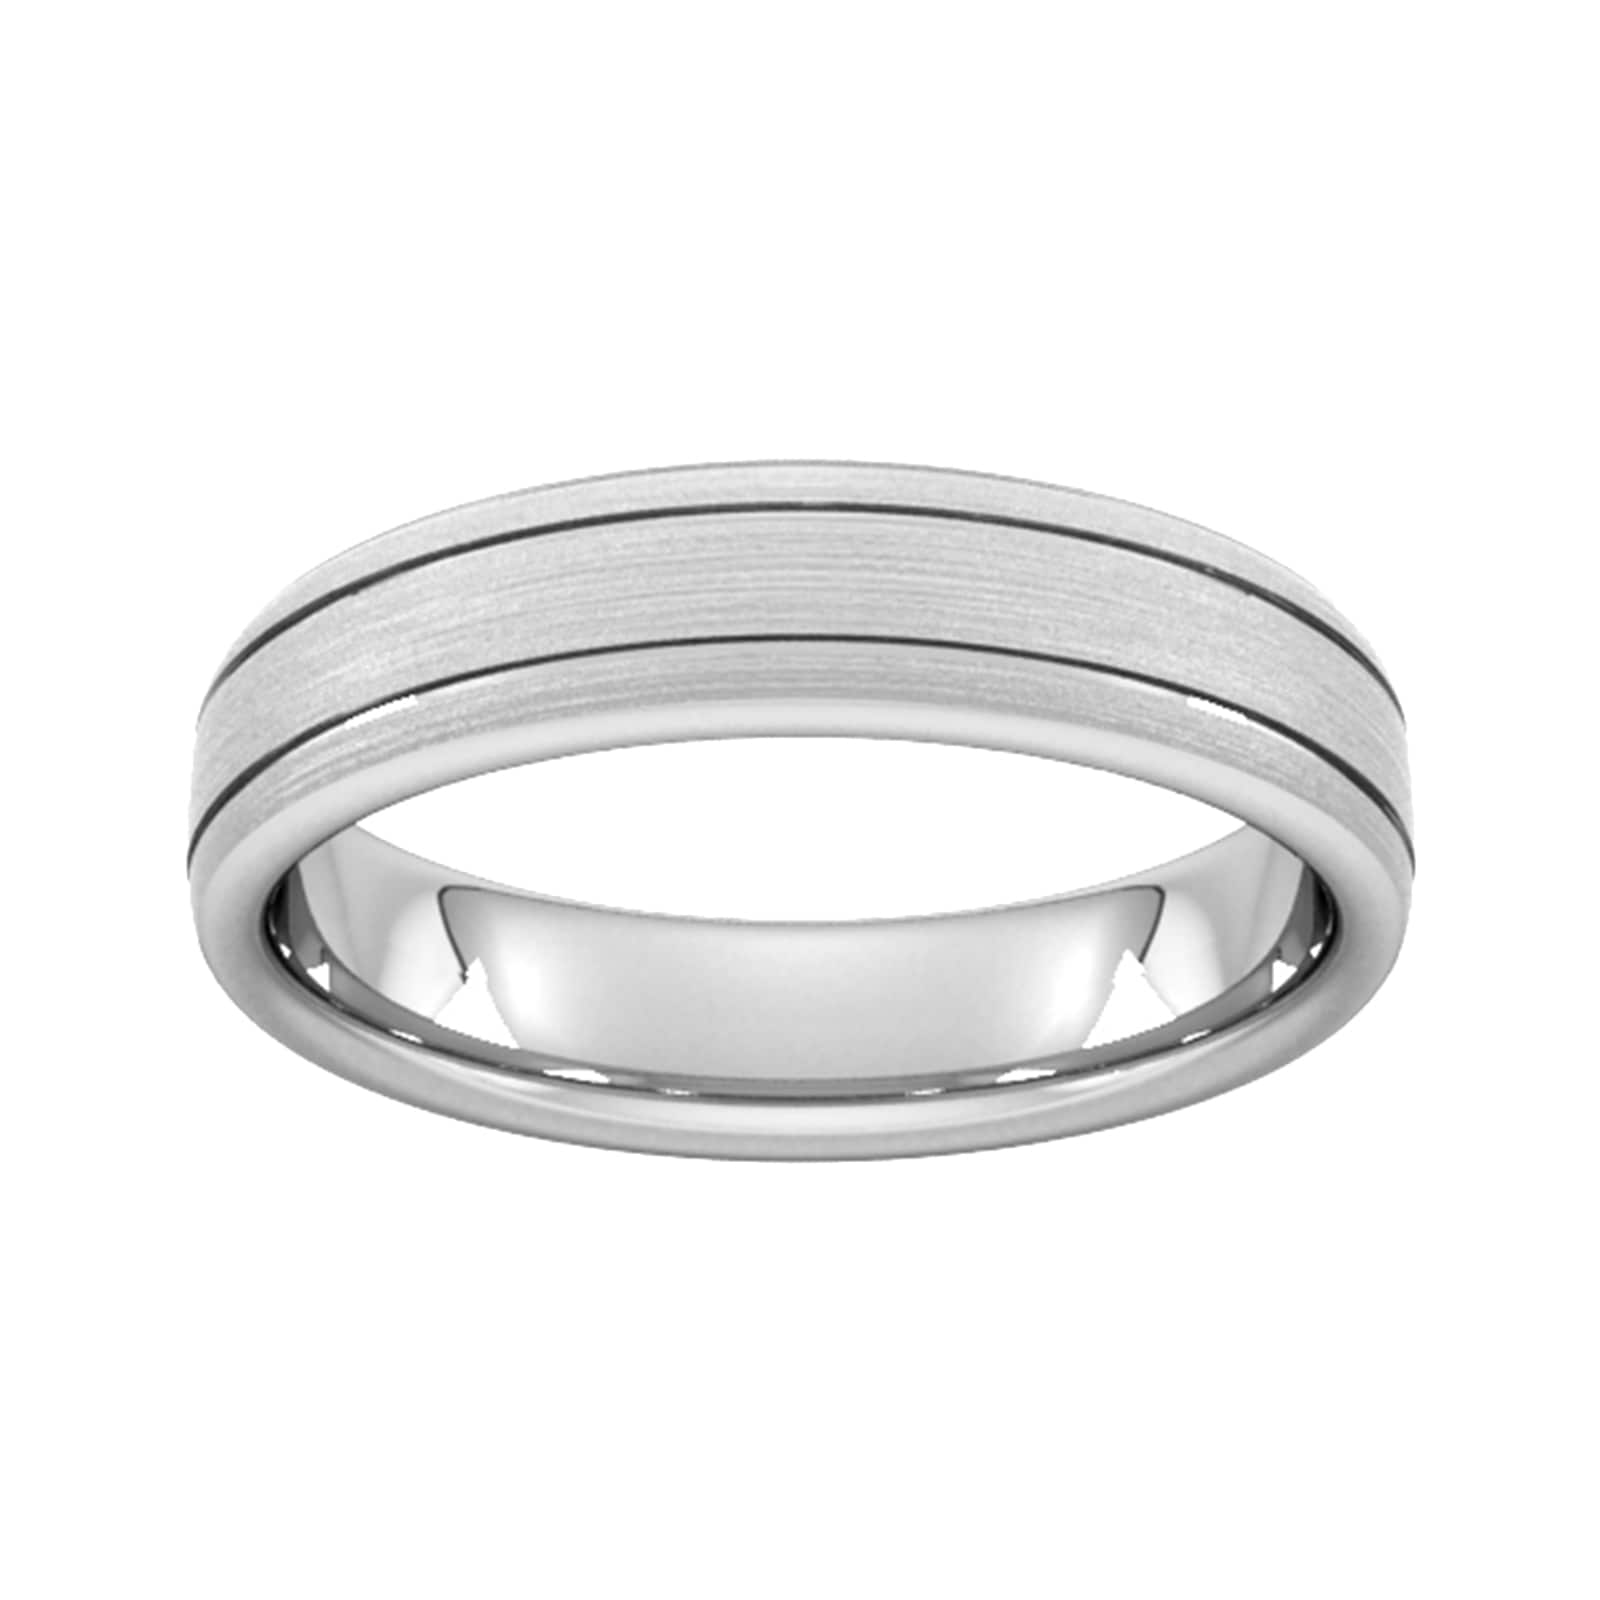 5mm Traditional Court Standard Matt Finish With Double Grooves Wedding Ring In 950 Palladium - Ring Size W